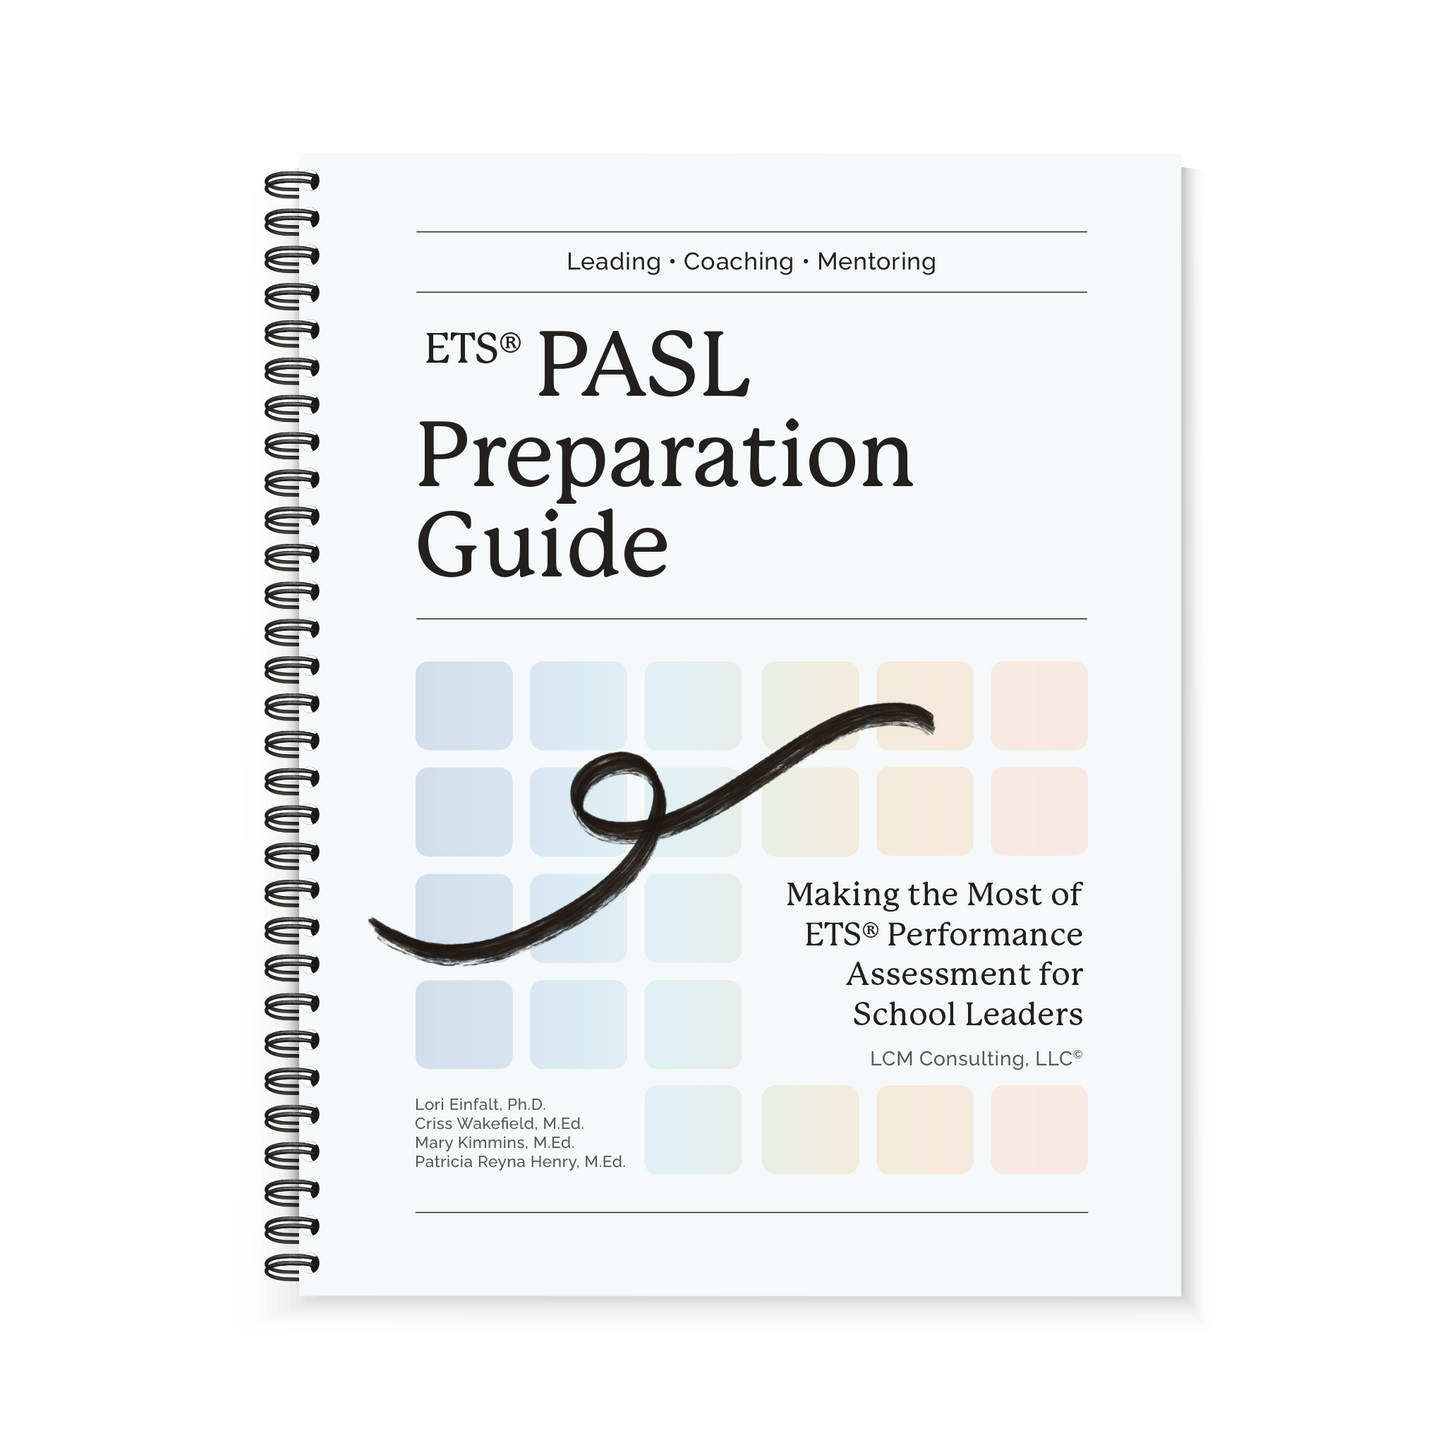 Colorful squares adorn the front cover of the PASL Preparation Guide book.